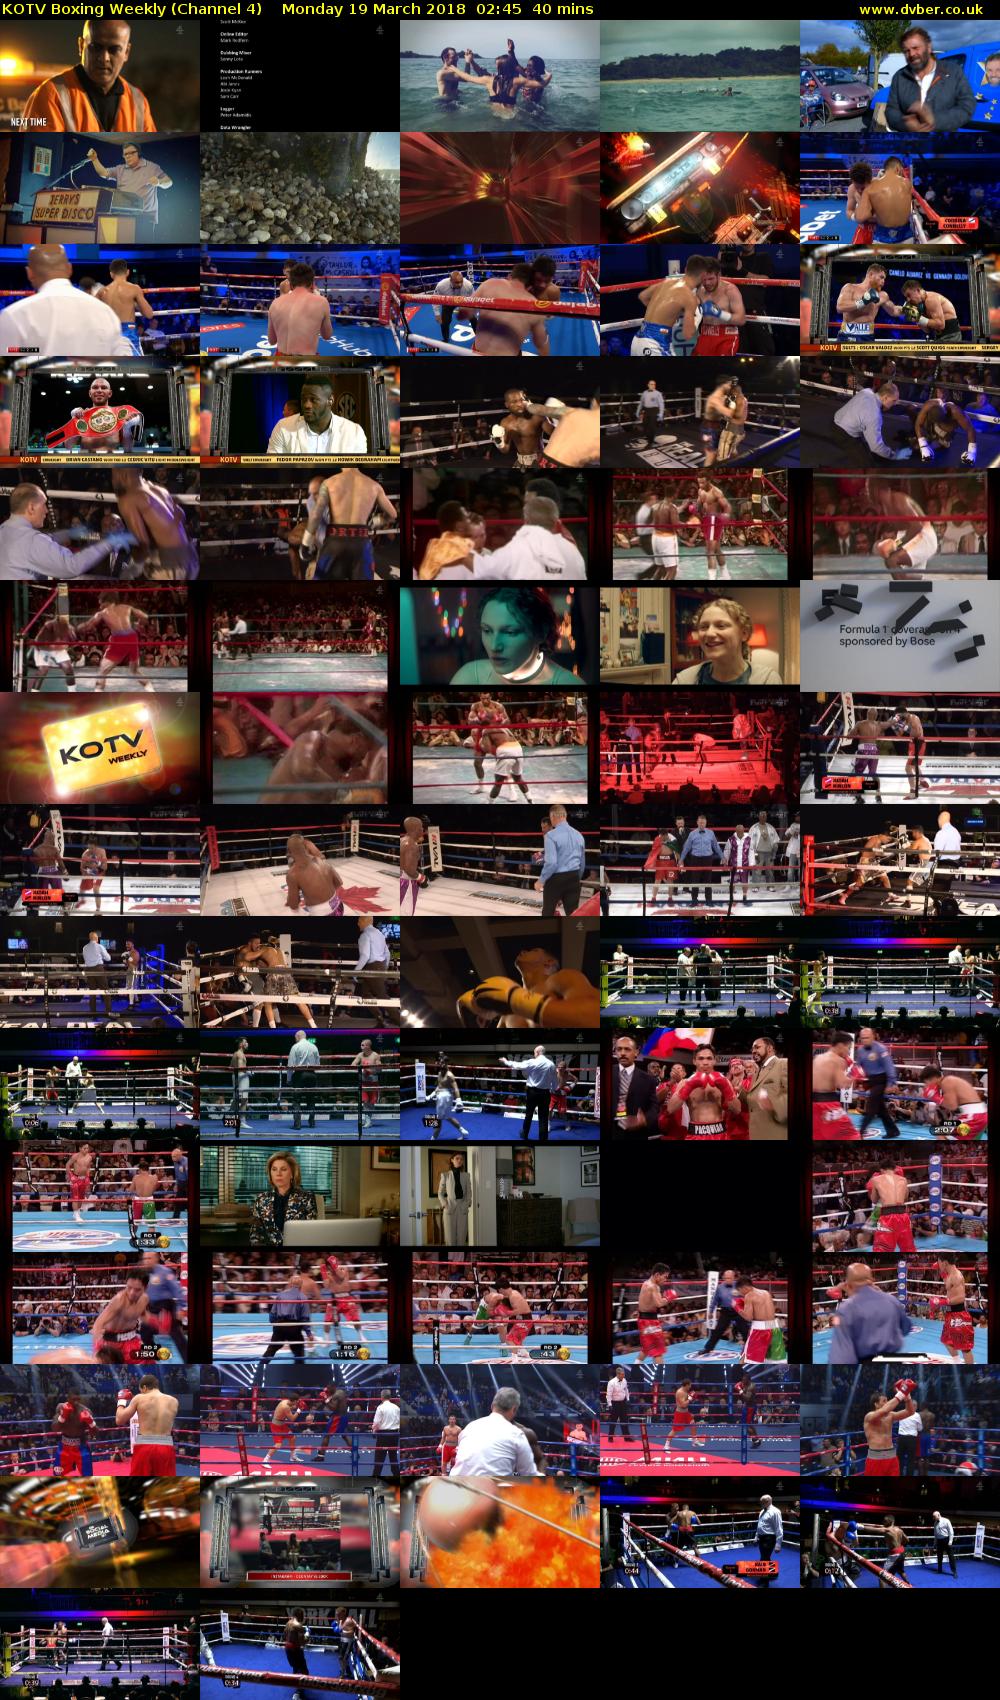 KOTV Boxing Weekly (Channel 4) Monday 19 March 2018 02:45 - 03:25